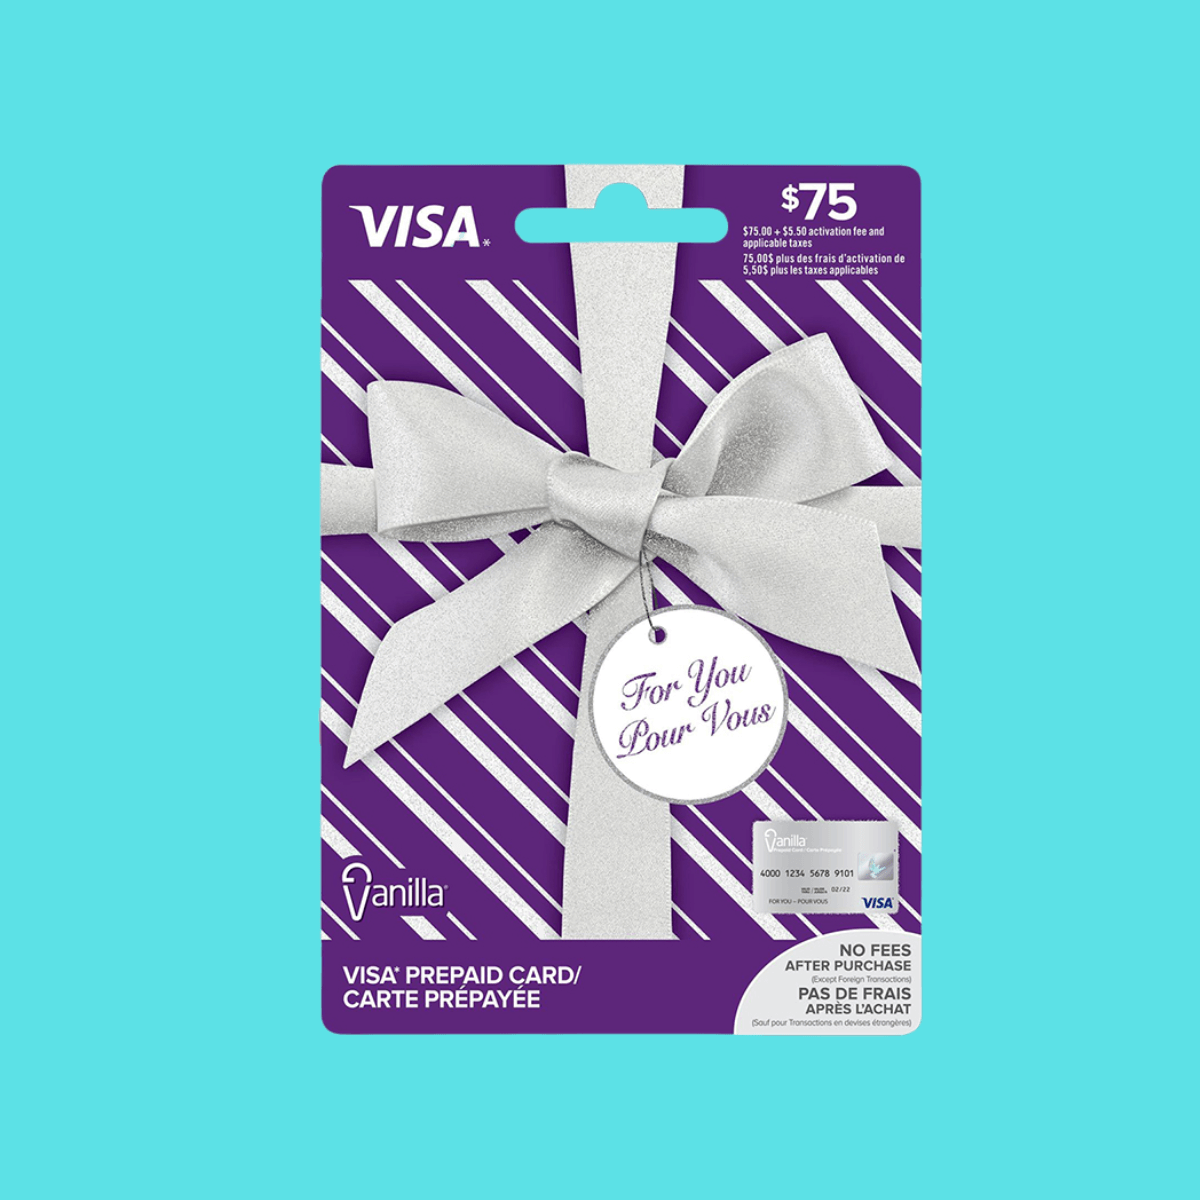 Easy Ways To Check Visa Gift Card Balance By 1-800-571-1376. — Steemit